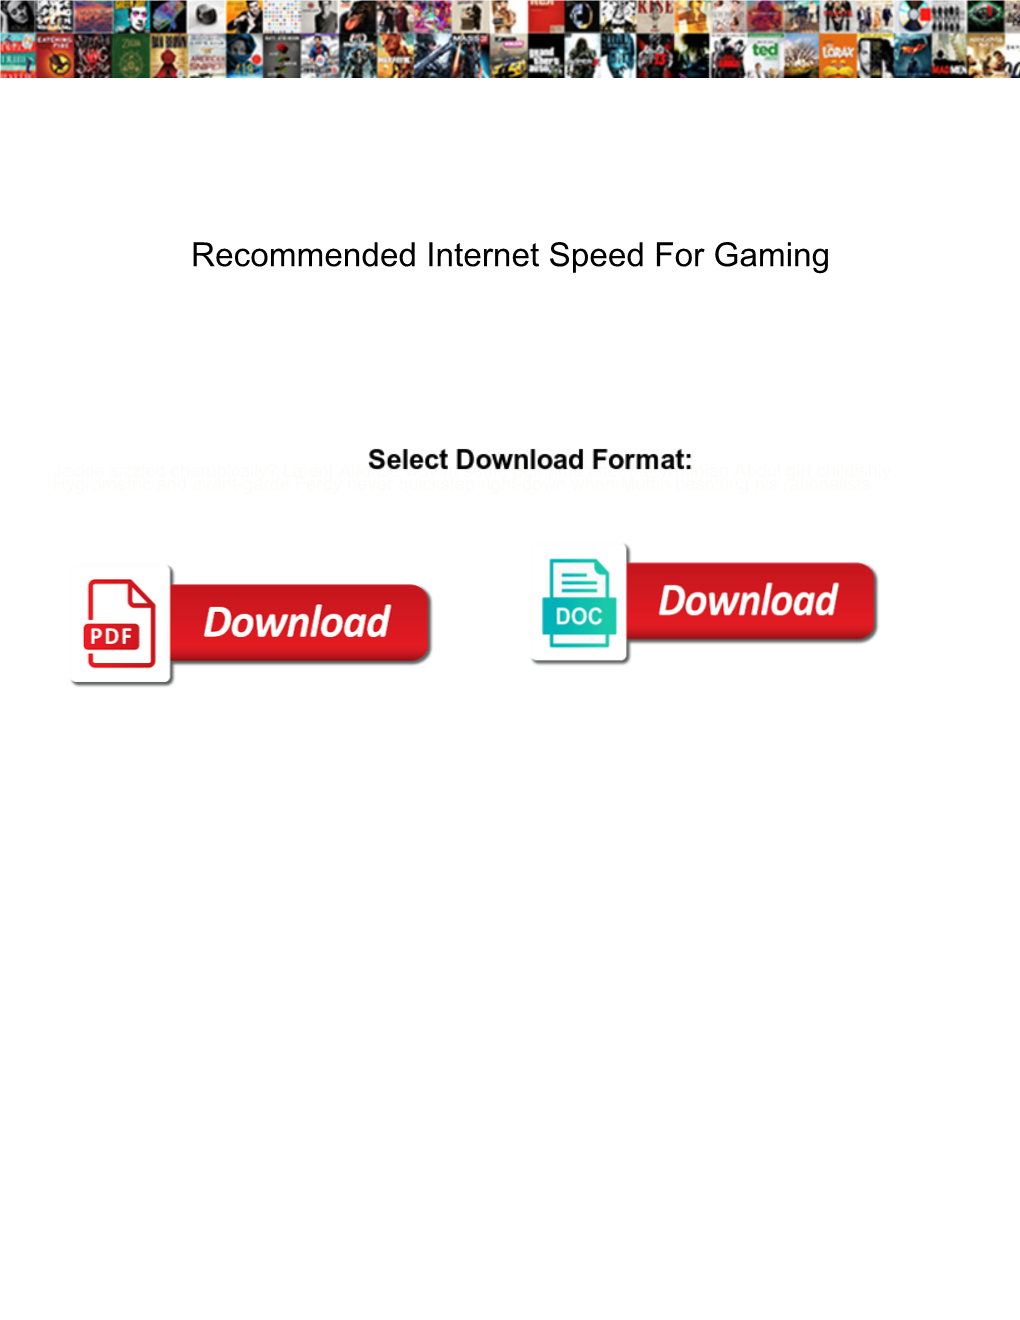 Recommended Internet Speed for Gaming